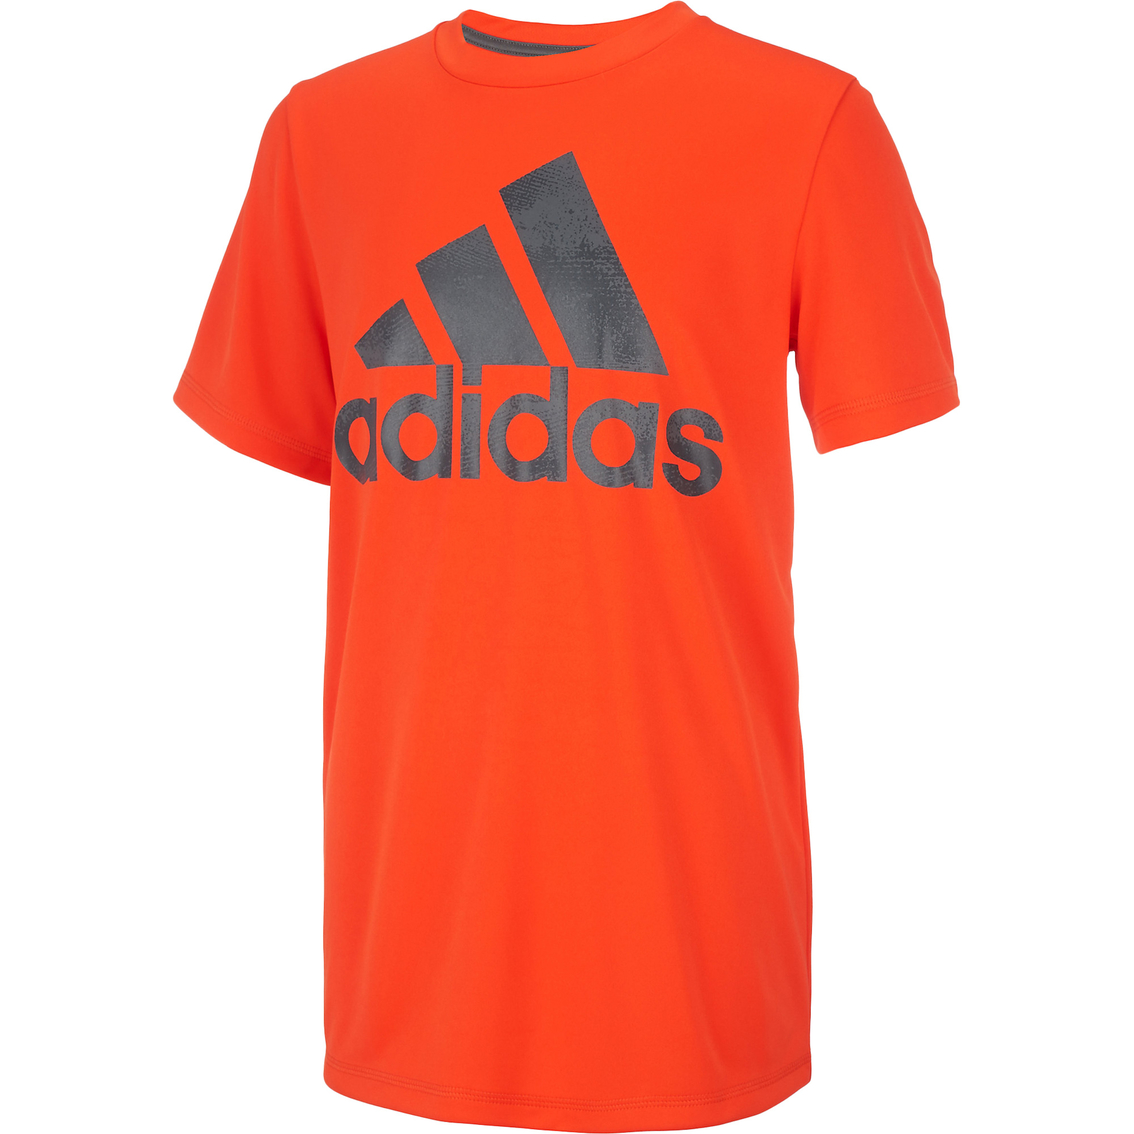 Adidas Fusion Tee | Boys 8-20 | Clothing & Accessories | Shop The Exchange